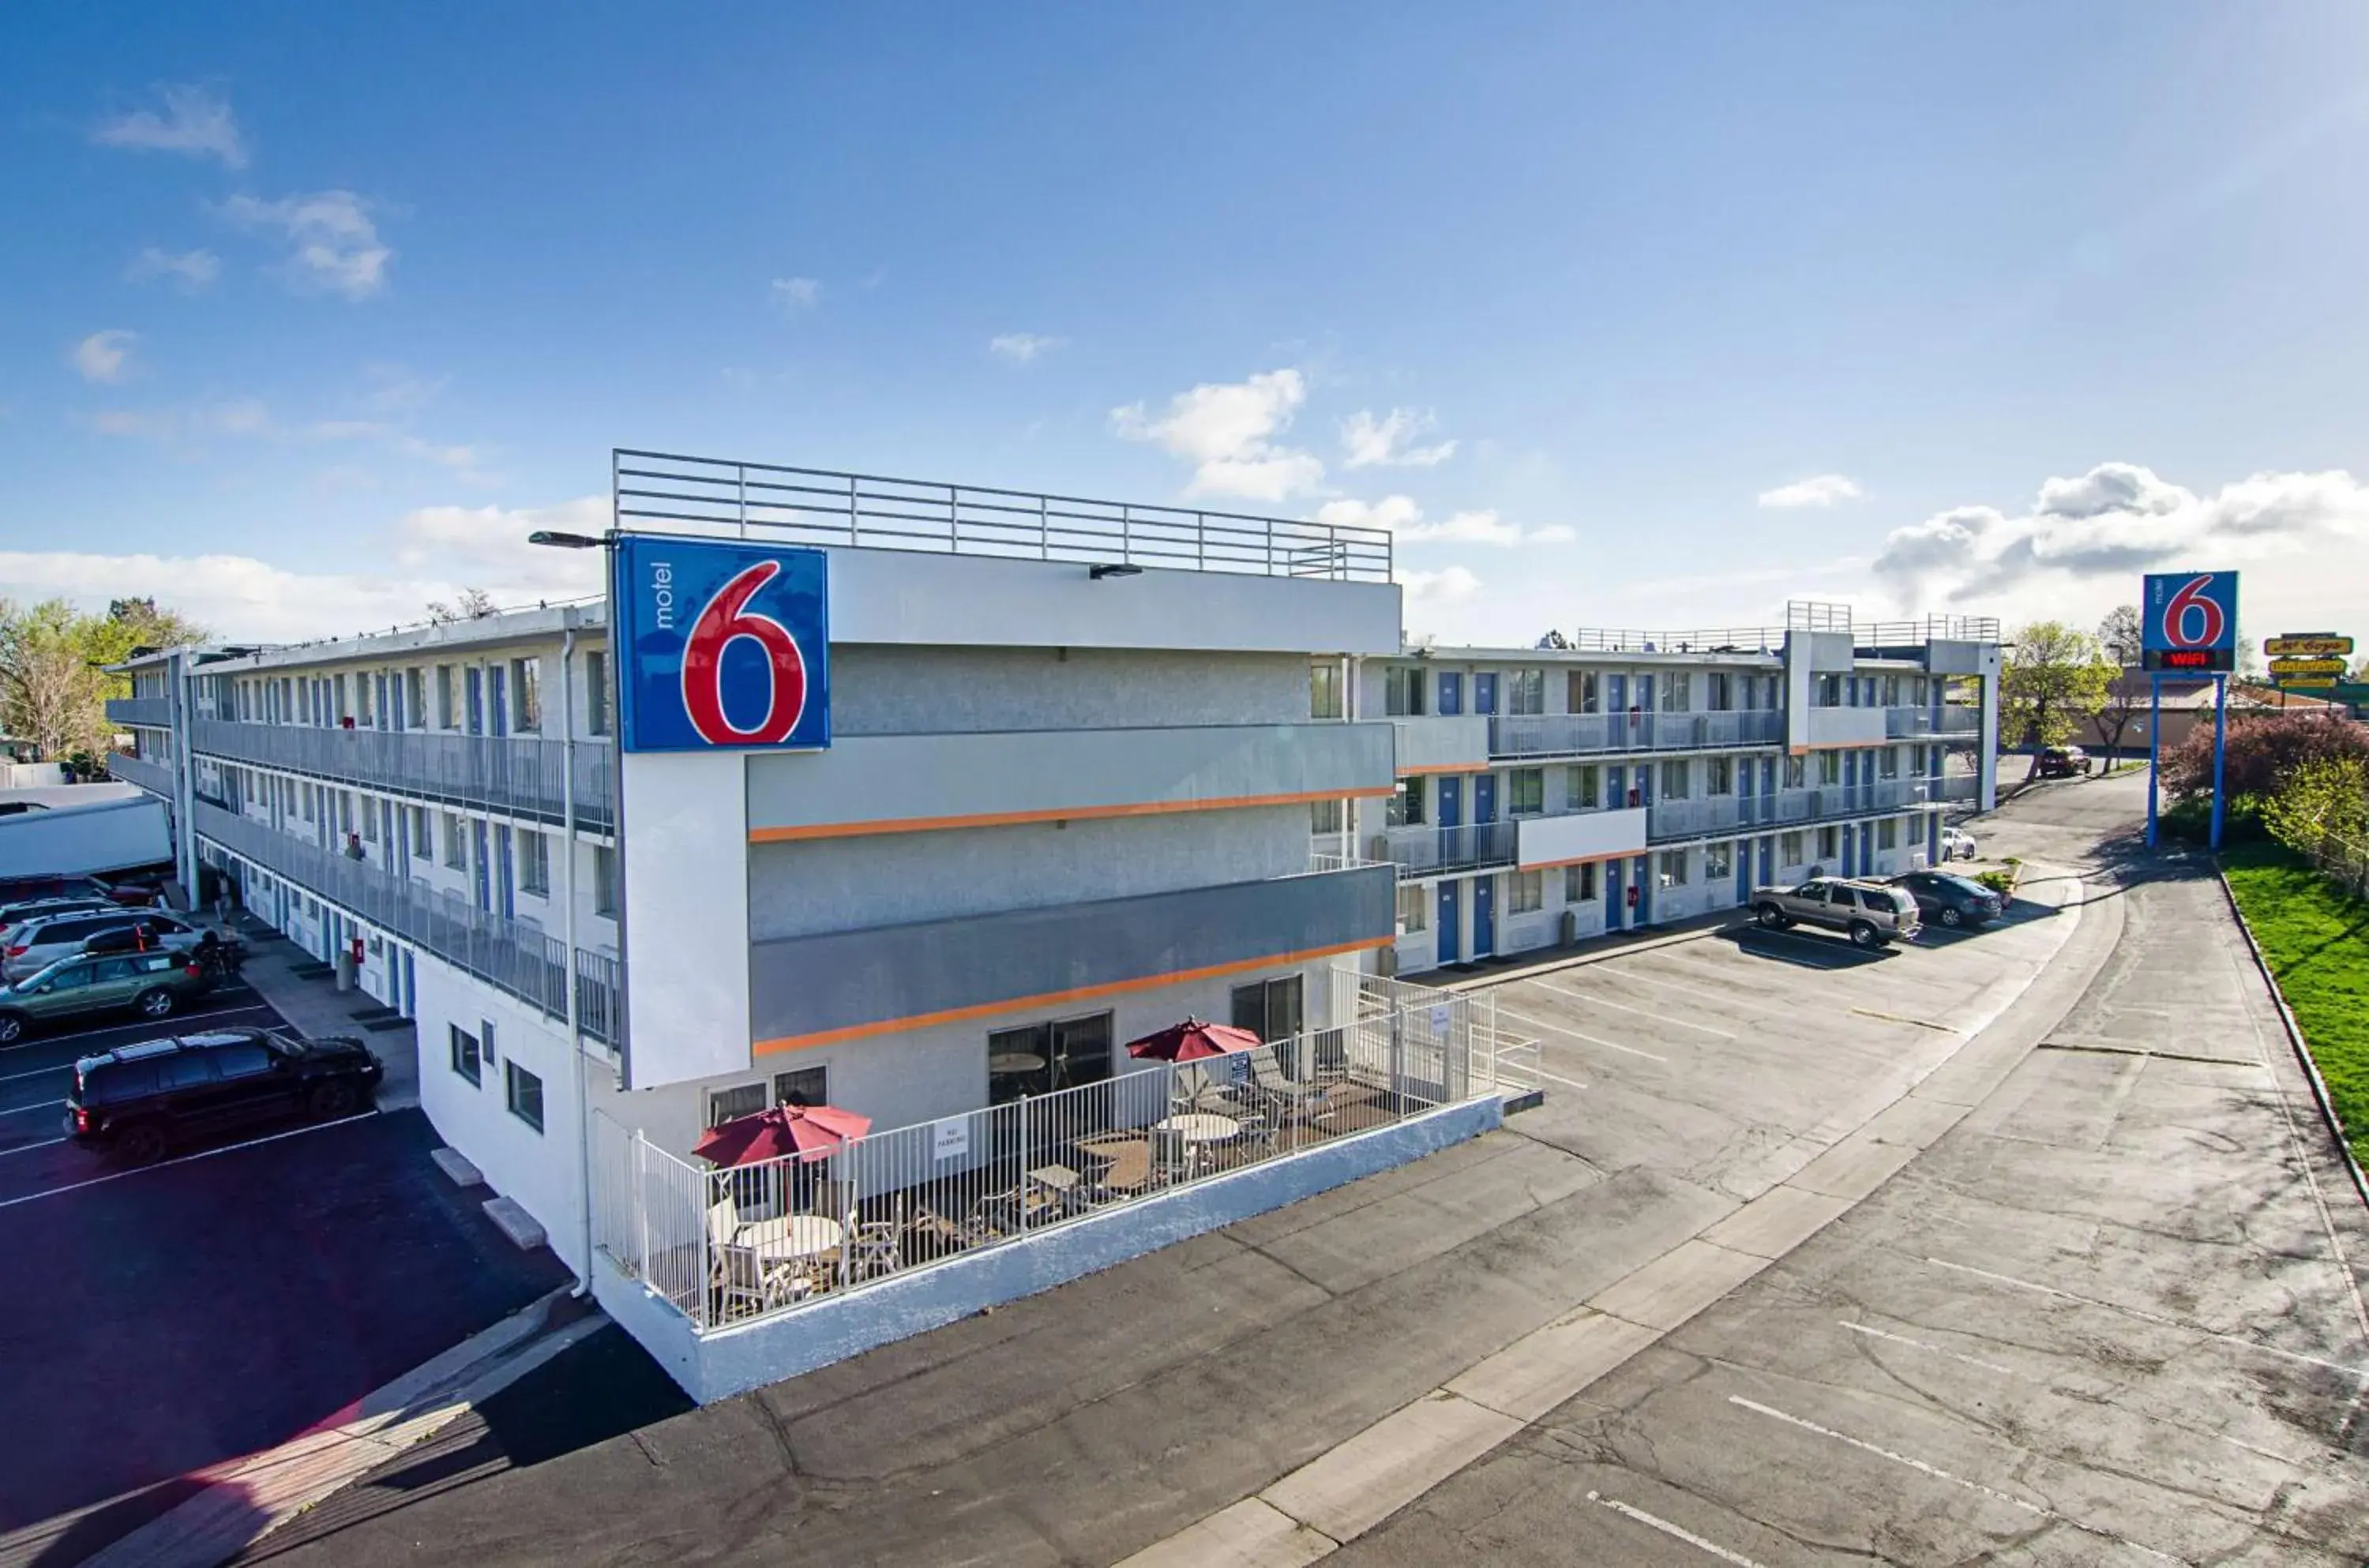 Property building in Motel 6- Denver, CO Downtown